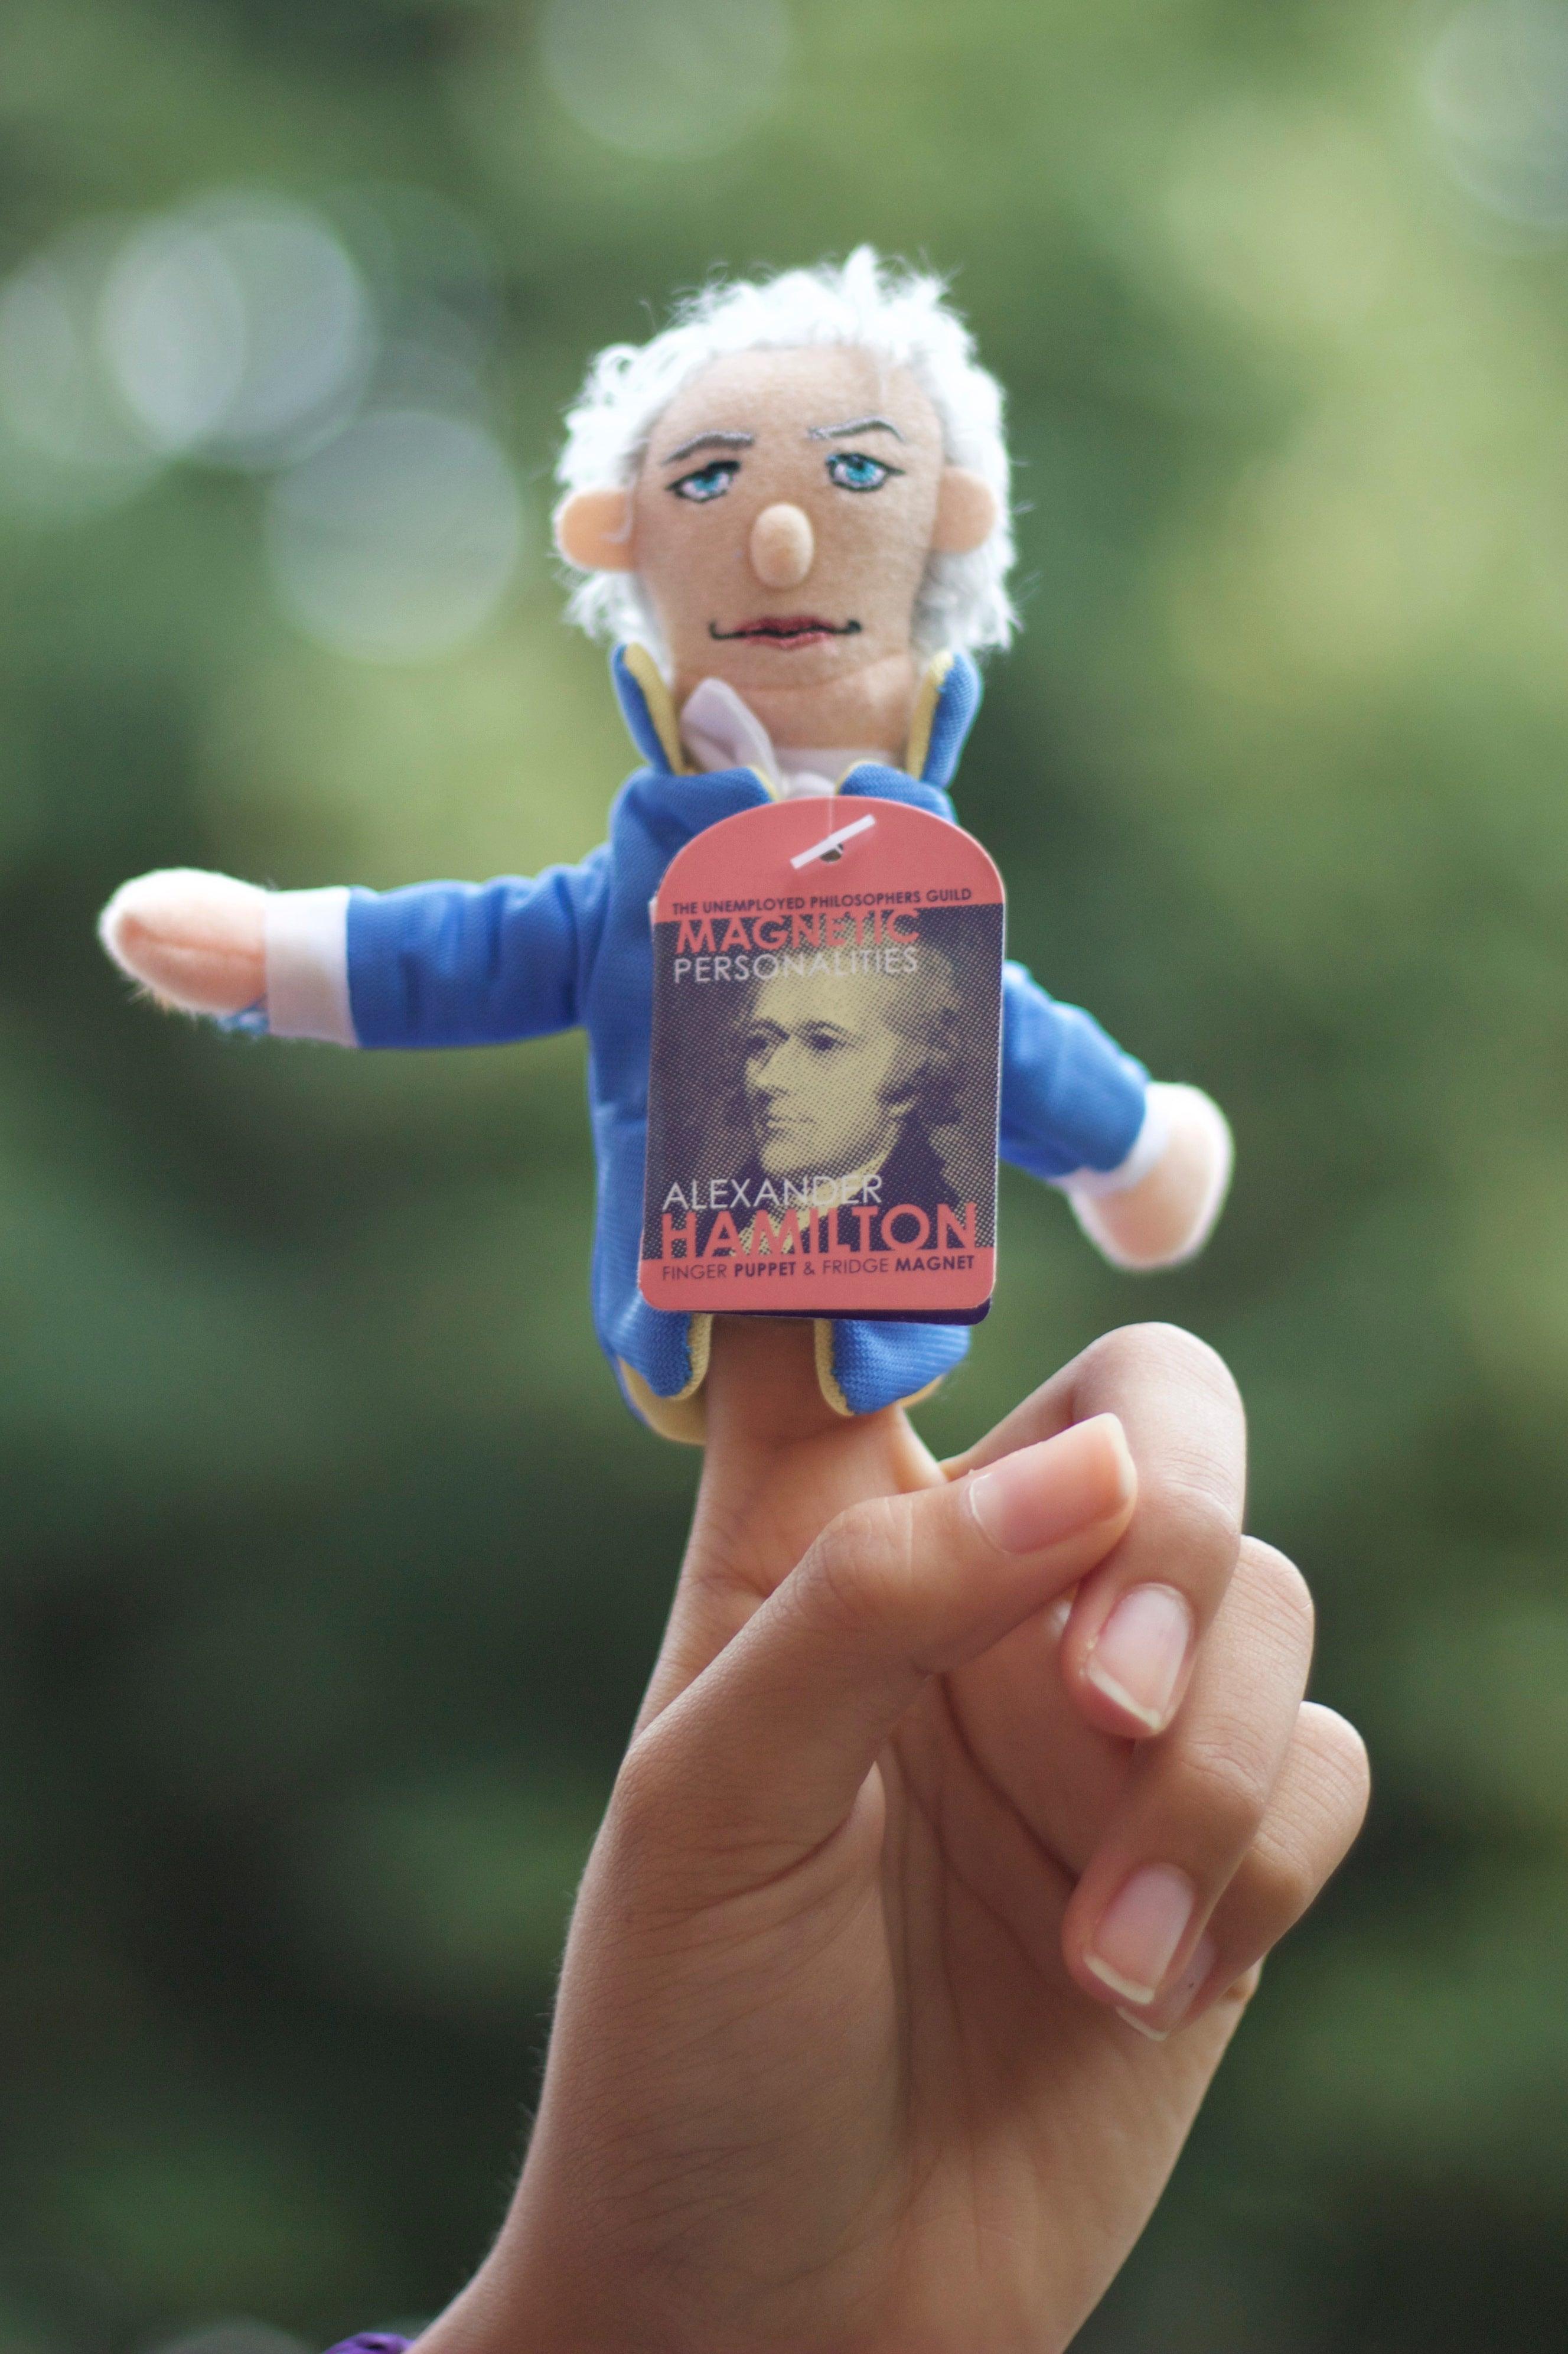 Product photo of Alexander Hamilton Finger Puppet, a novelty gift manufactured by The Unemployed Philosophers Guild.